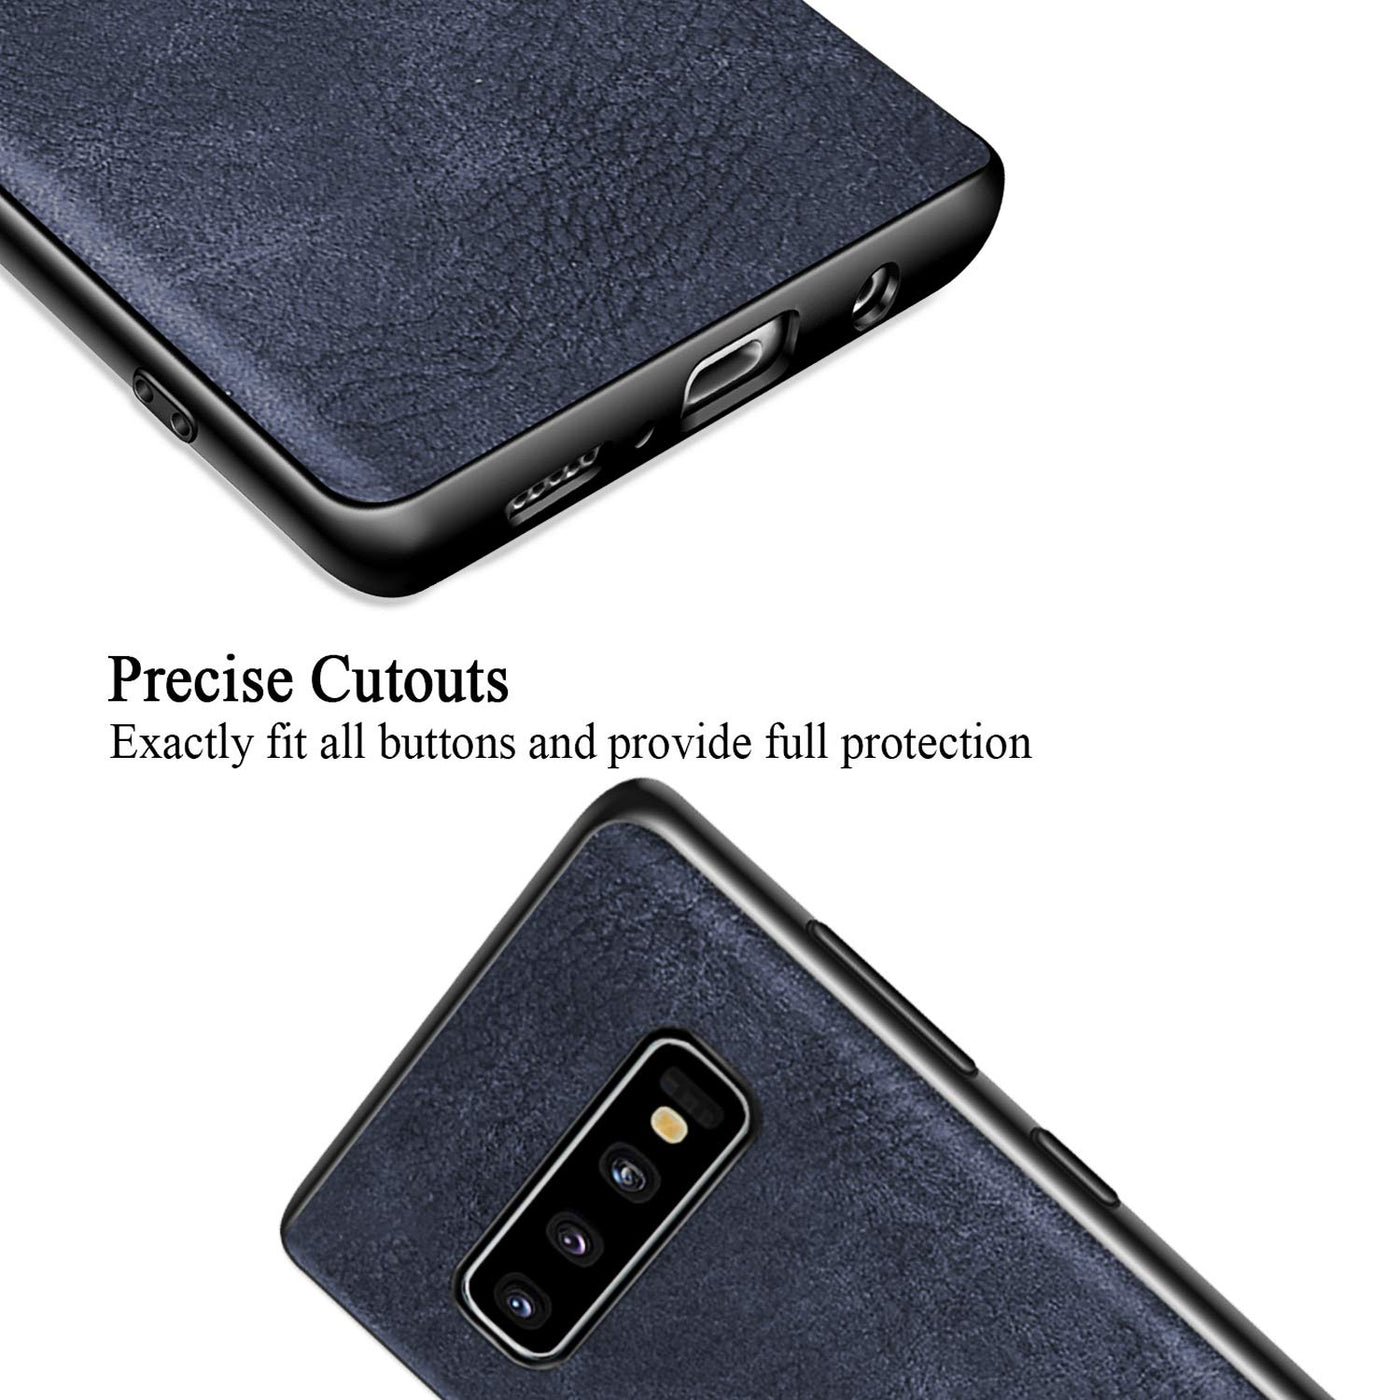 Excelsior Premium PU Leather Back Cover Case For Samsung Galaxy S10 Plus